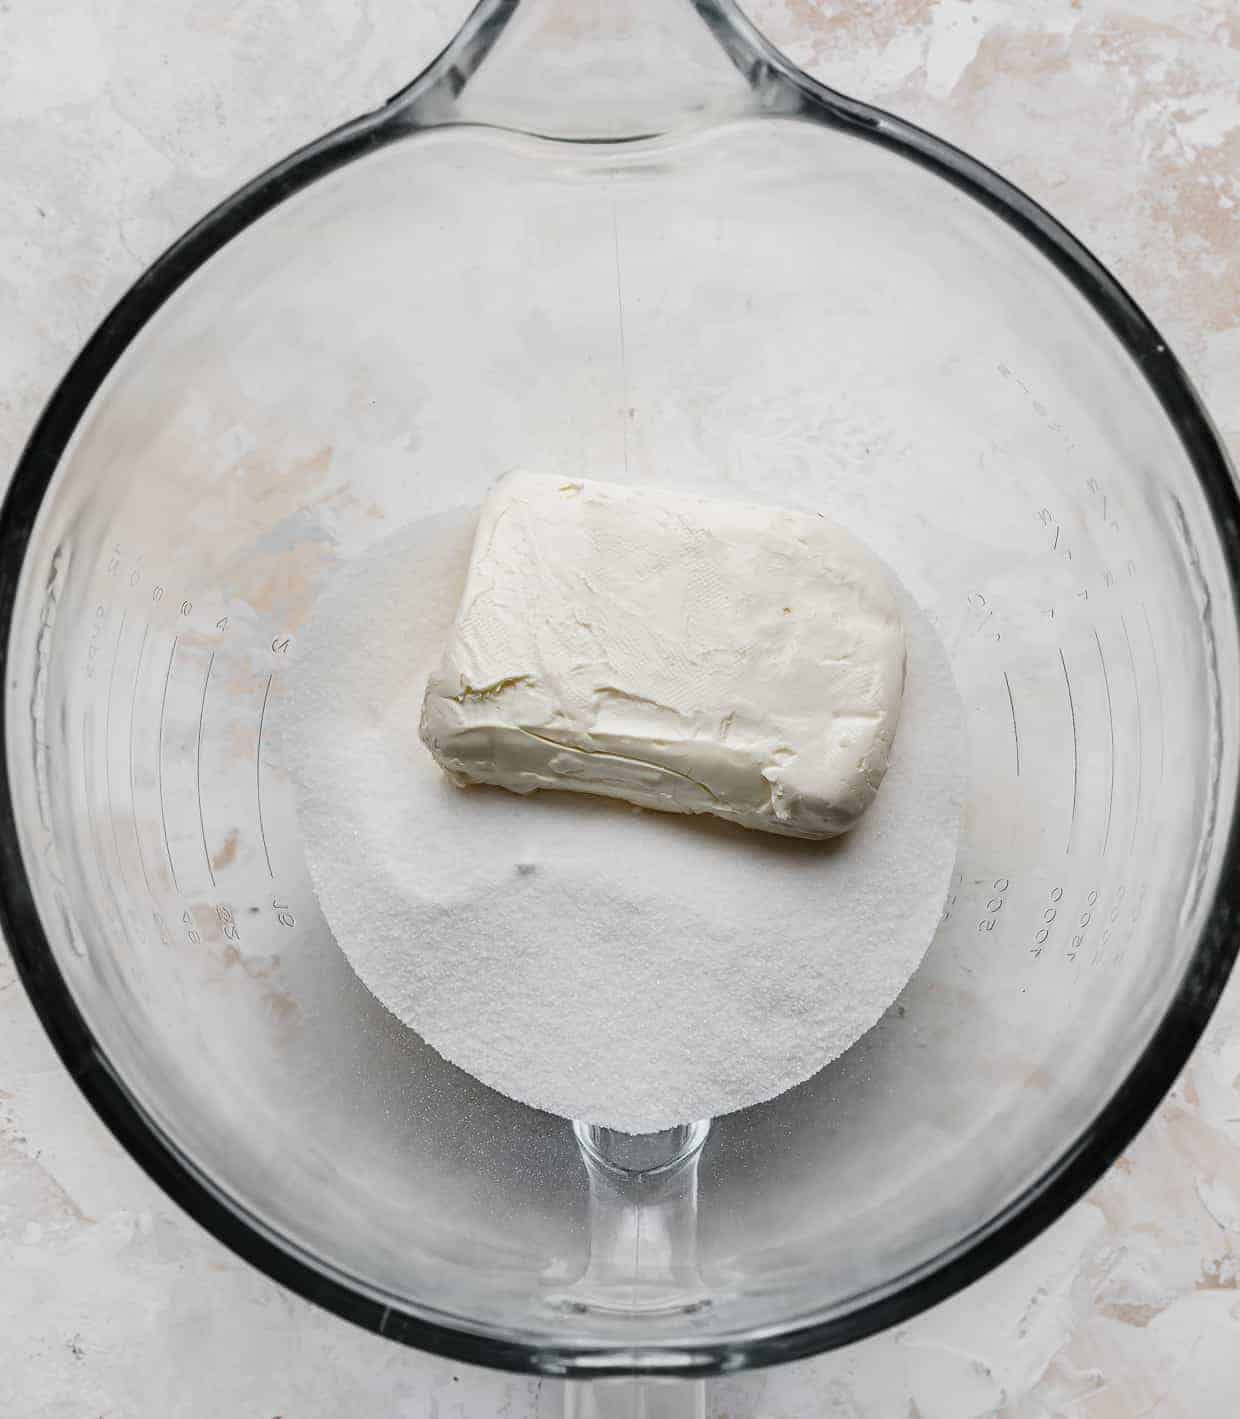 A glass mixing bowl with granulated sugar and a block of white cream cheese in it.